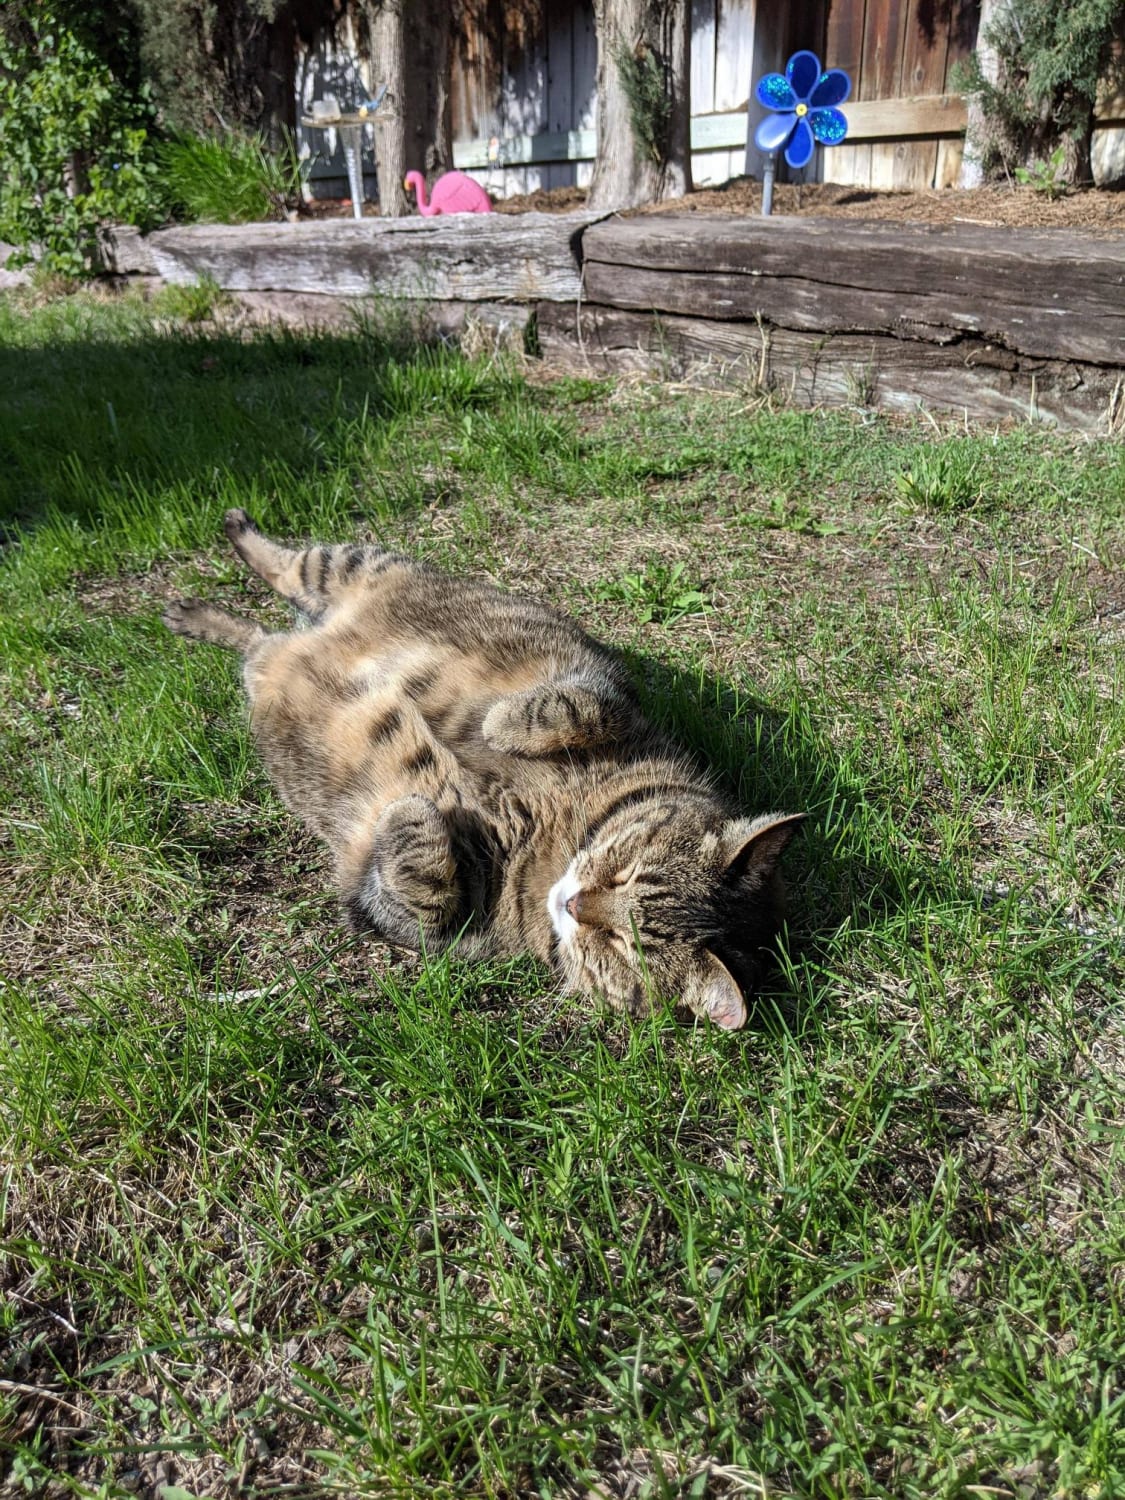 Another day means another sun for this chonker to lay under.